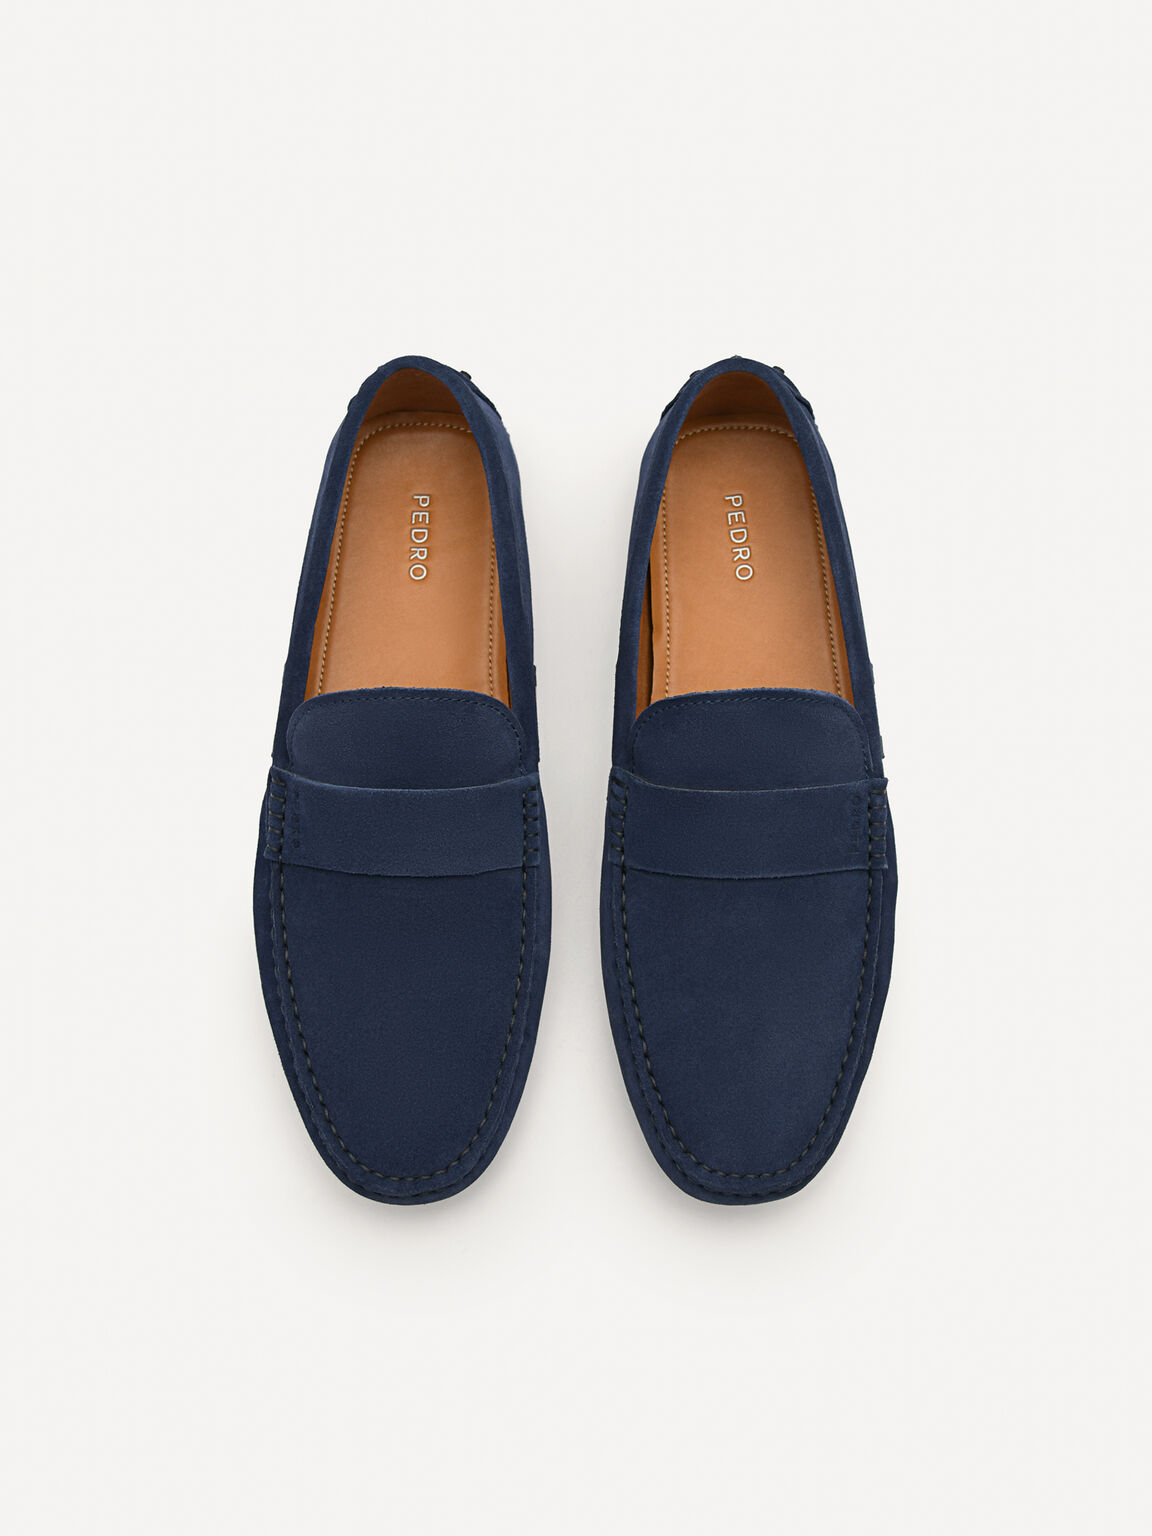 Leather Band Moccasins, Navy